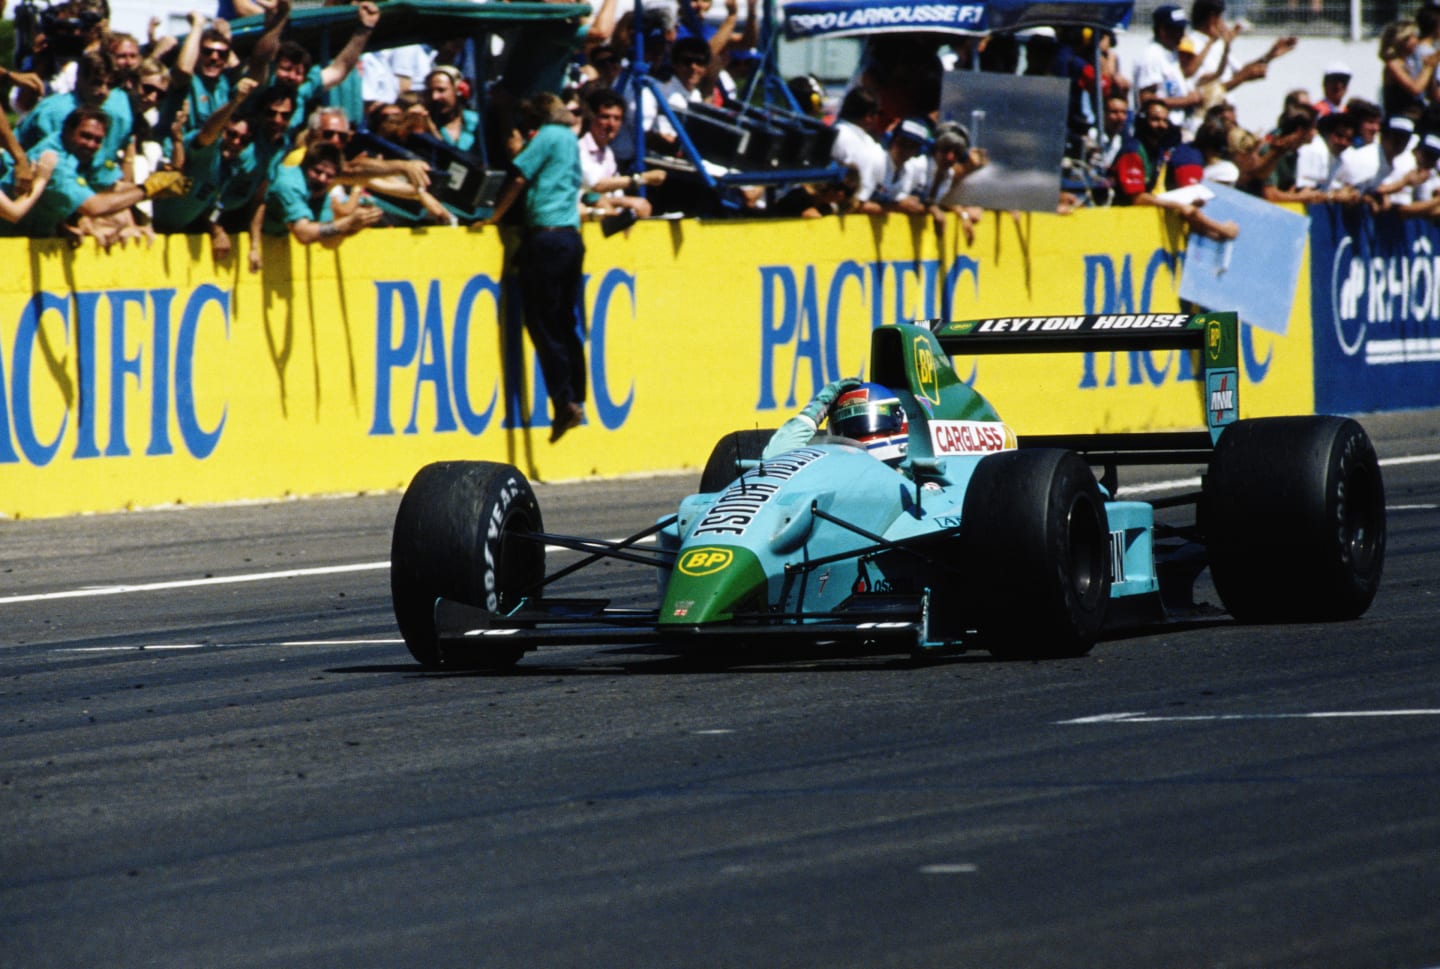 Ivan Capelli driver of the #16 Leyton House Racing Leyton House CG901 Judd celebrates his and the